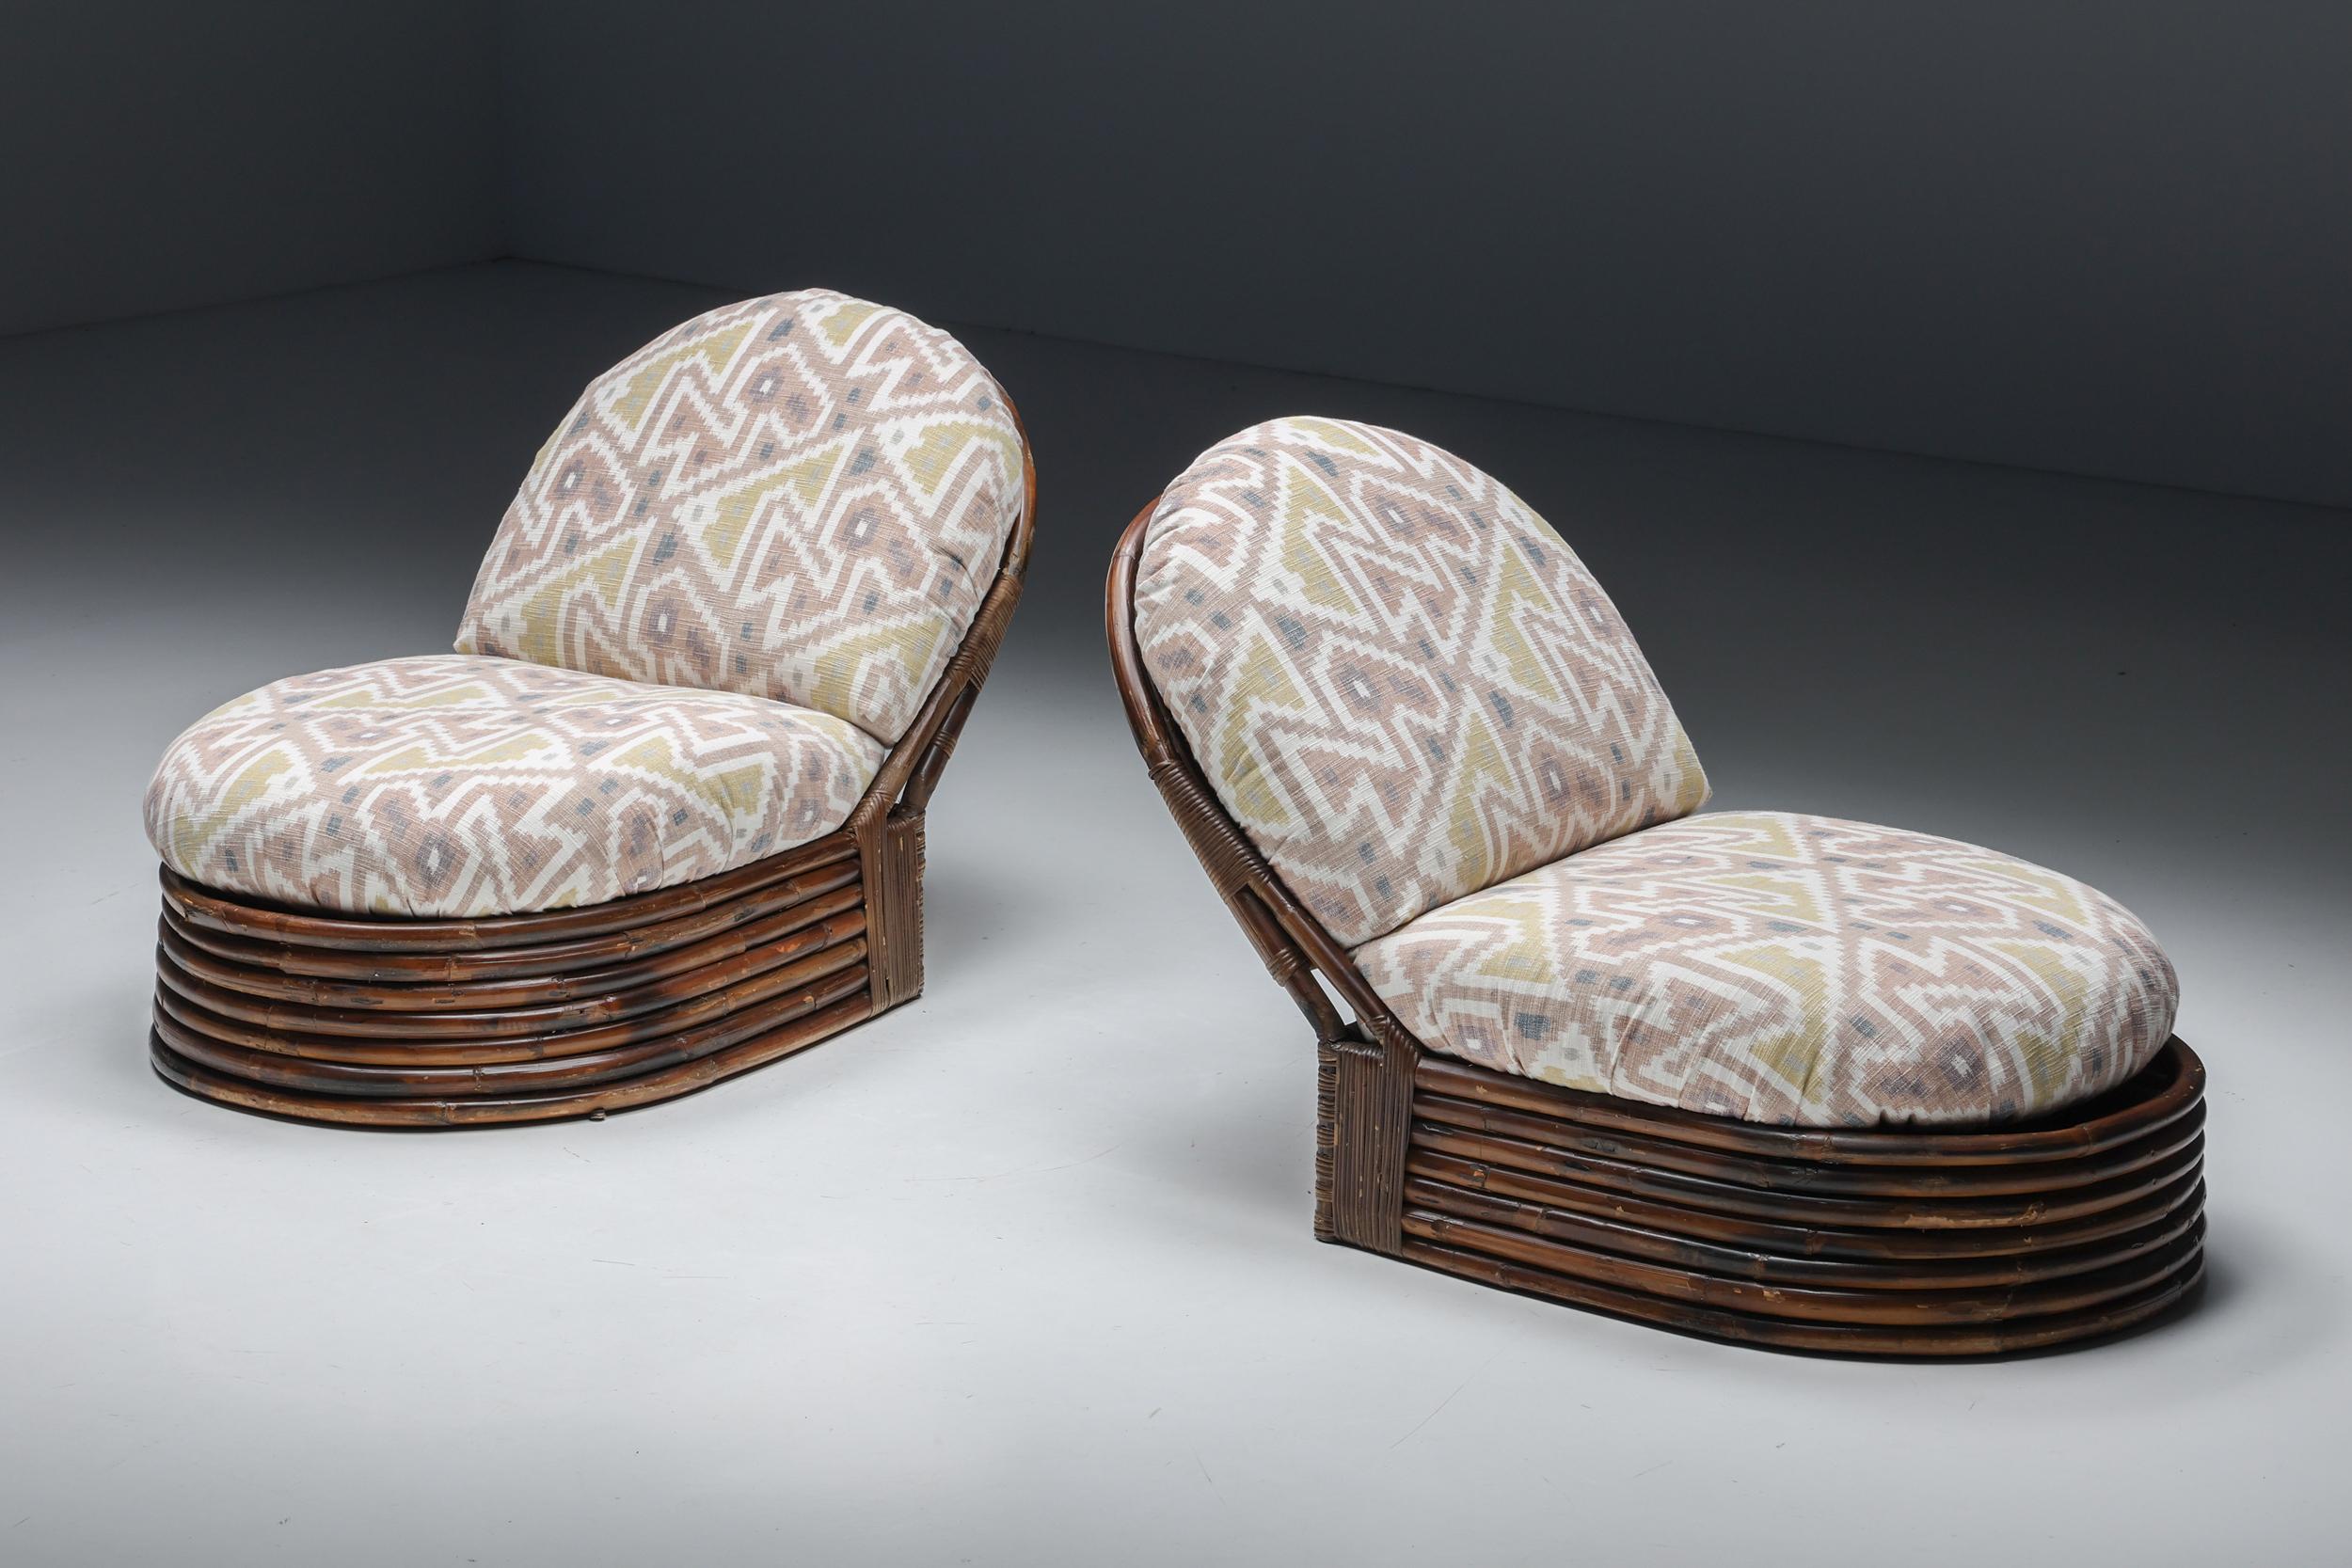 Vivai del Sud; Bamboo; Lounge Chairs; Upholstery; Mid-Century Modern; 1970s; 1970s Design; Italy; Pierre Frey Jacquard; Tropical; Exotic; Cotton; Italian Design; 

A pair of Vivai del Sud bamboo lounge chairs, made in Italy in the 1970s. High-end